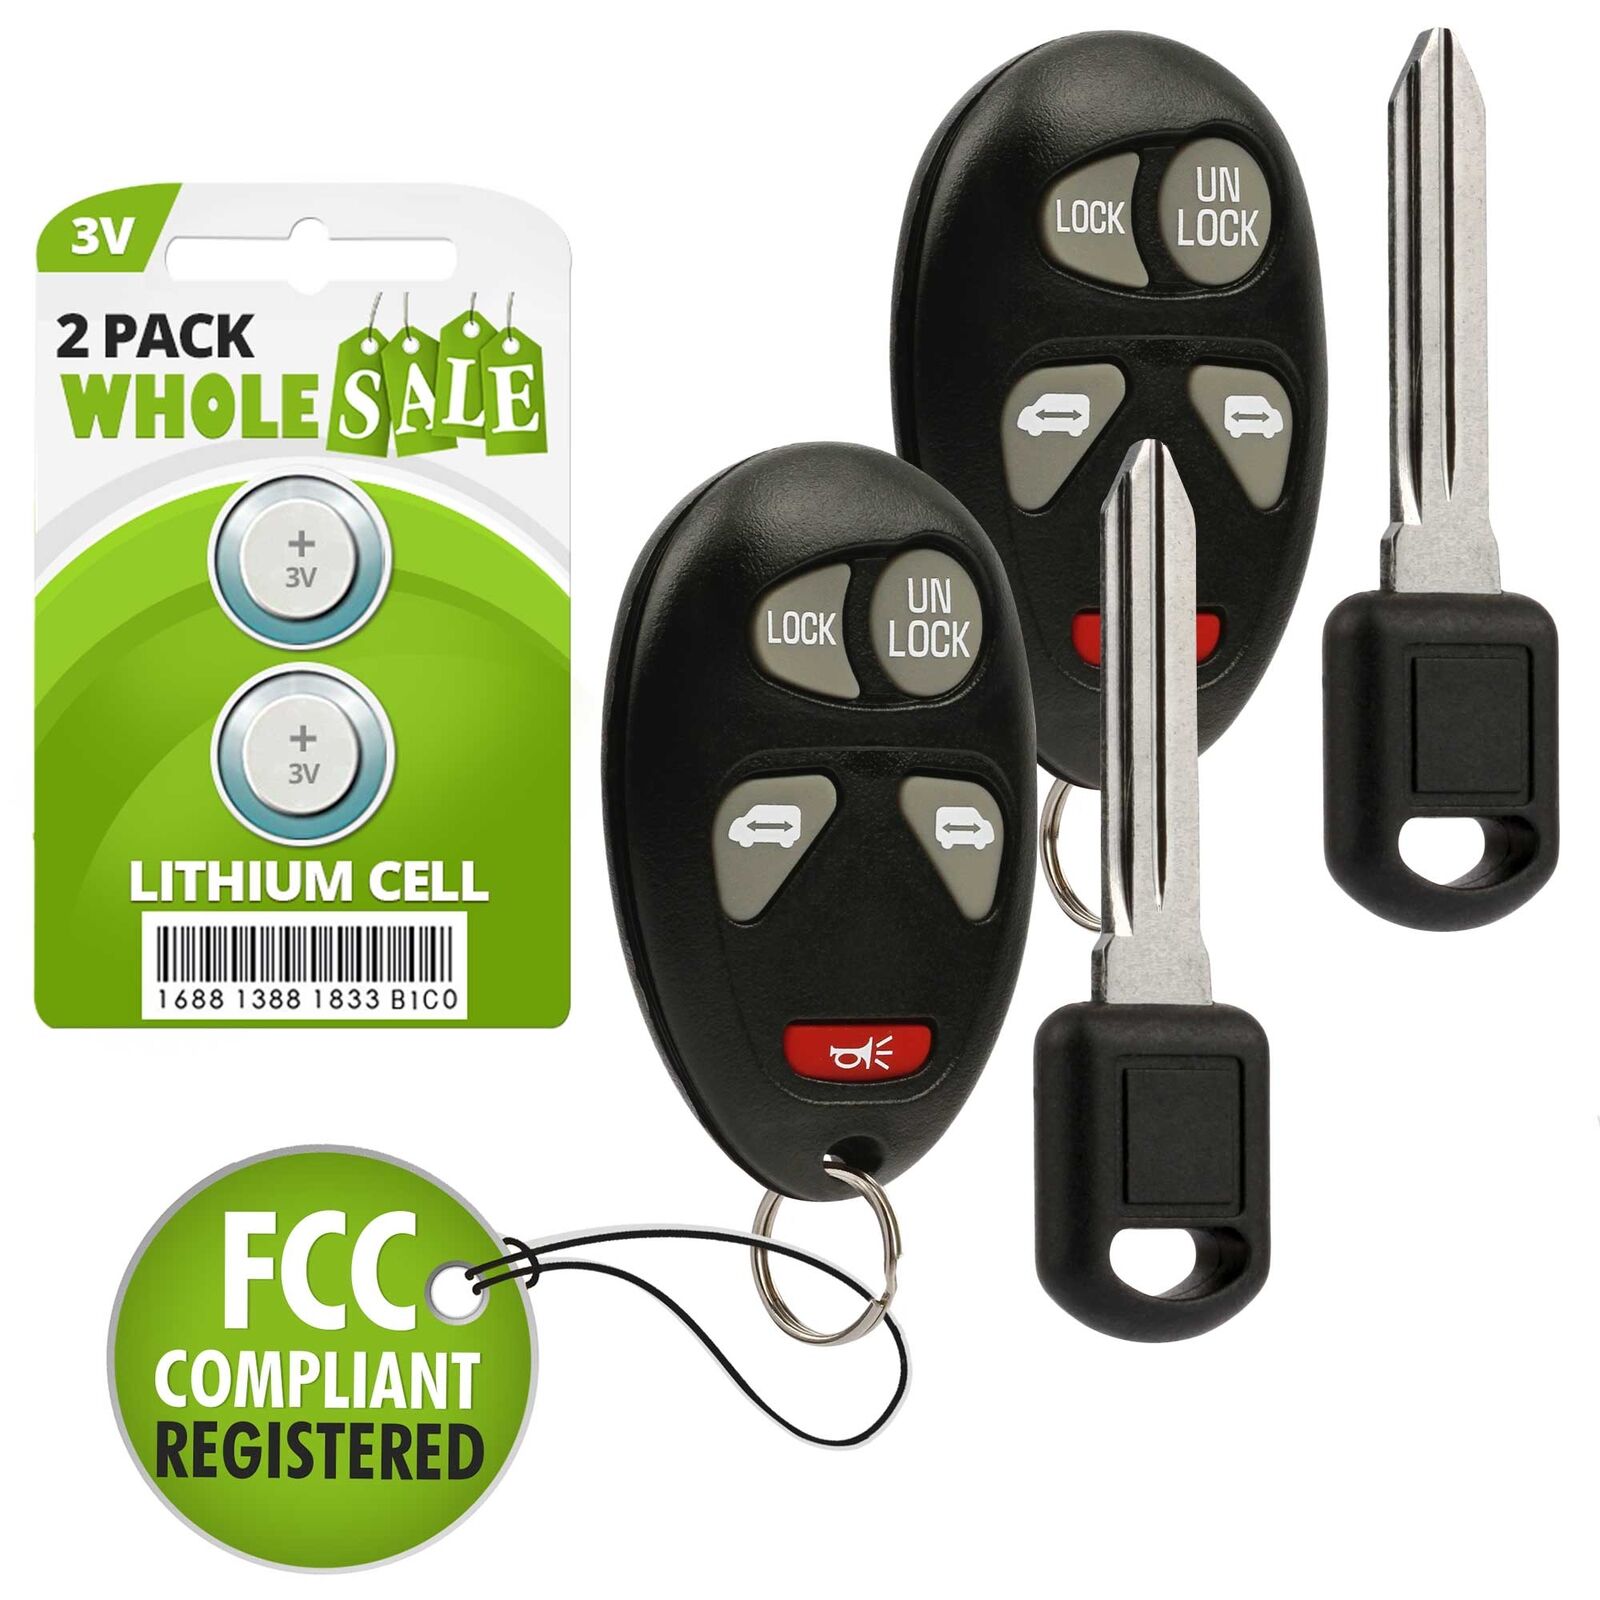 2 Replacement For 2001 2002 2003 2004 2005 Chevrolet Venture Key + Fob Remote